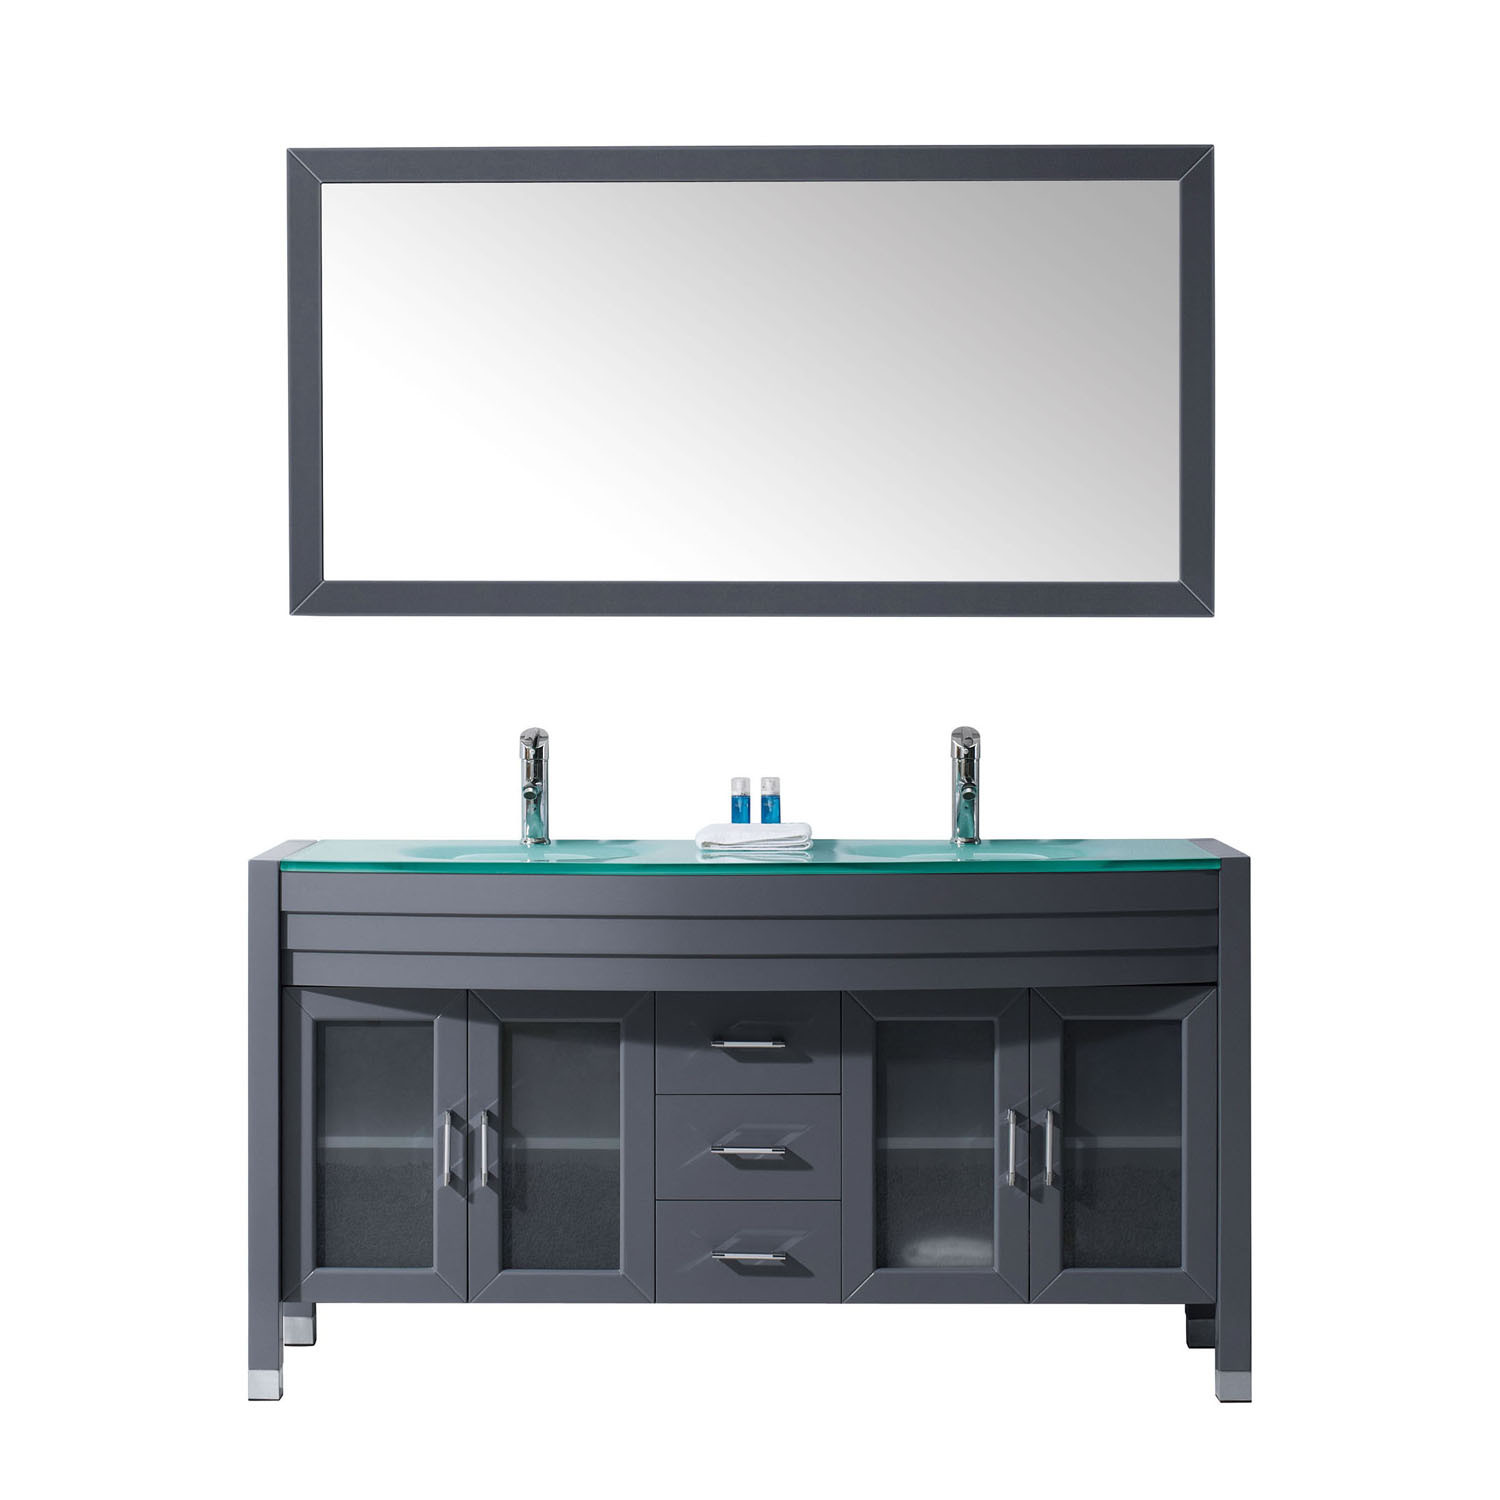 Virtu MD-499-G-GR Ava 63 Inch Double Bathroom Vanity Set In Grey With Tempered Glass Top